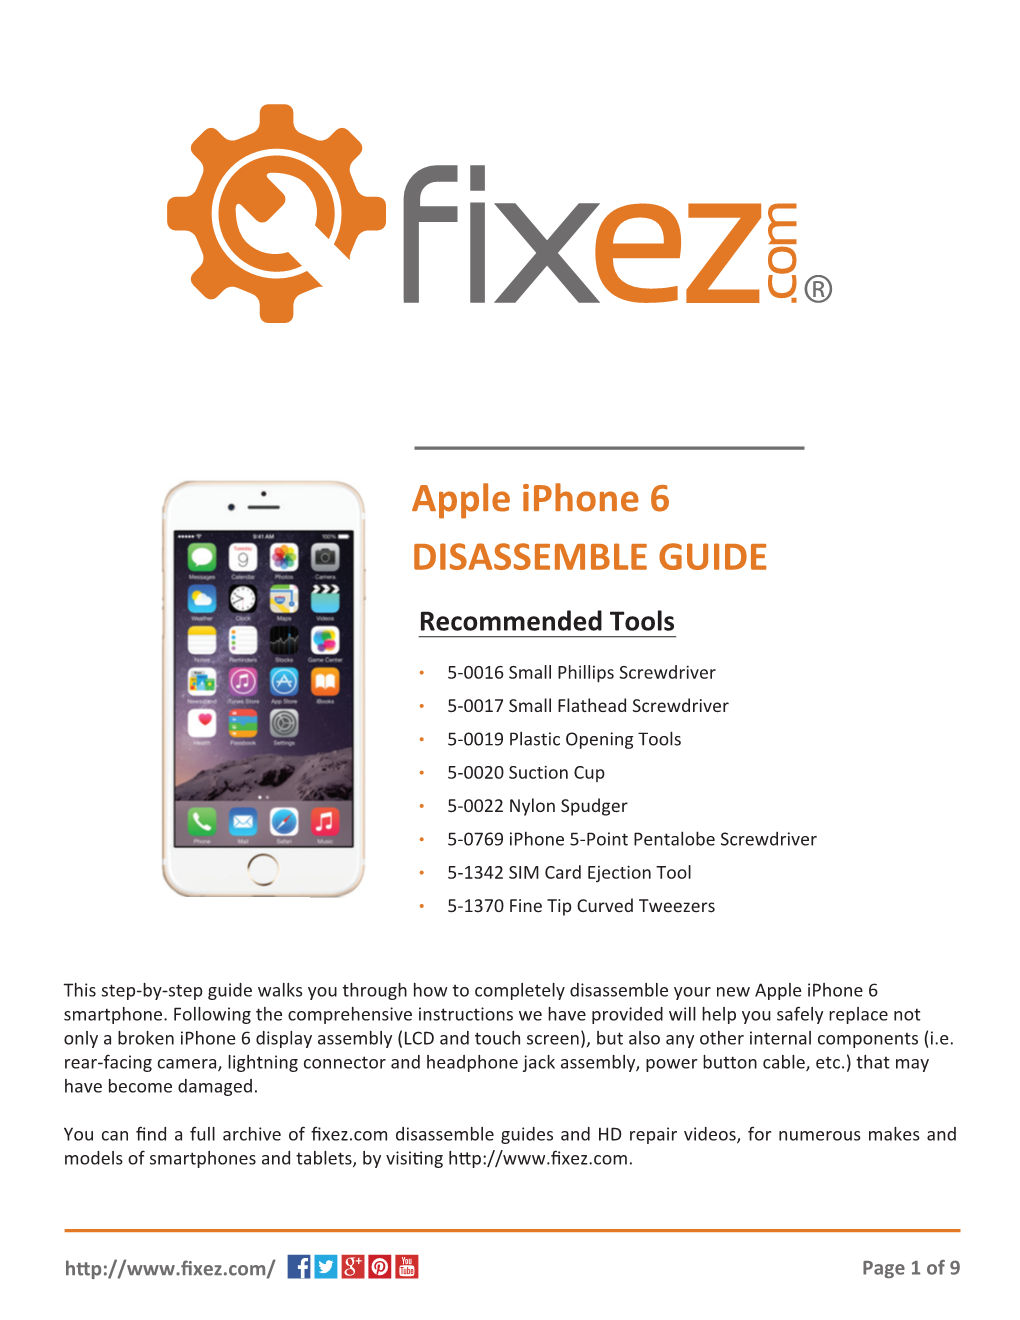 Iphone 6 DISASSEMBLE GUIDE Recommended Tools